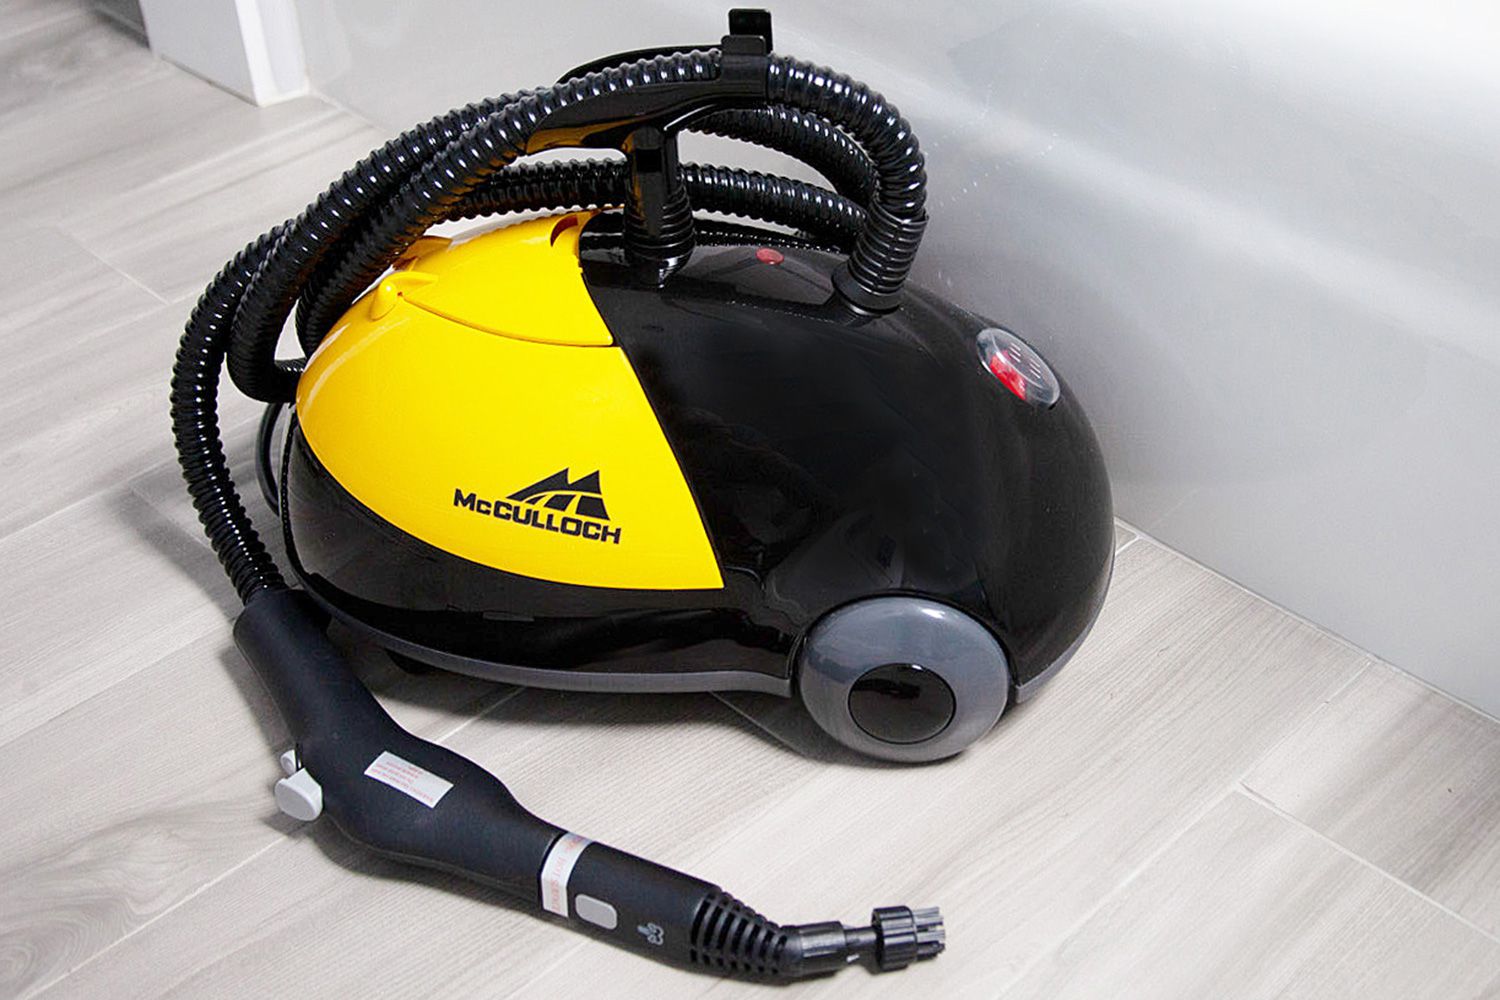 We Tested the Best Steam Cleaners for Freshening Up Your Space